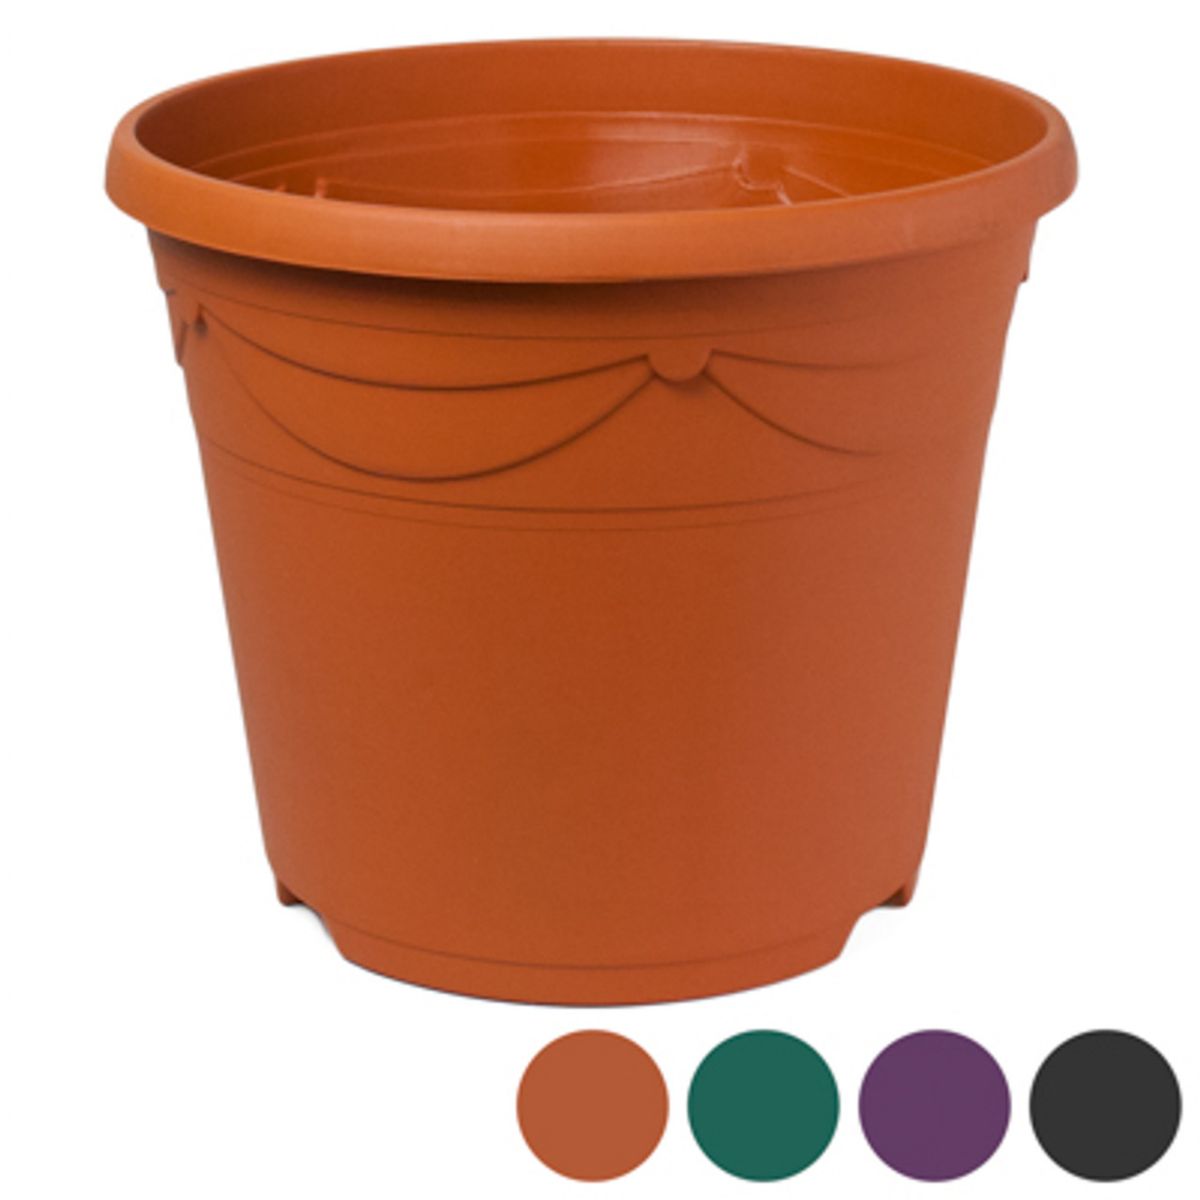 12 Pieces of Planter Round 14 Inch 4 Colors Terra Cotta, Hunter Green,black,purple With Holes Ref #decora 15